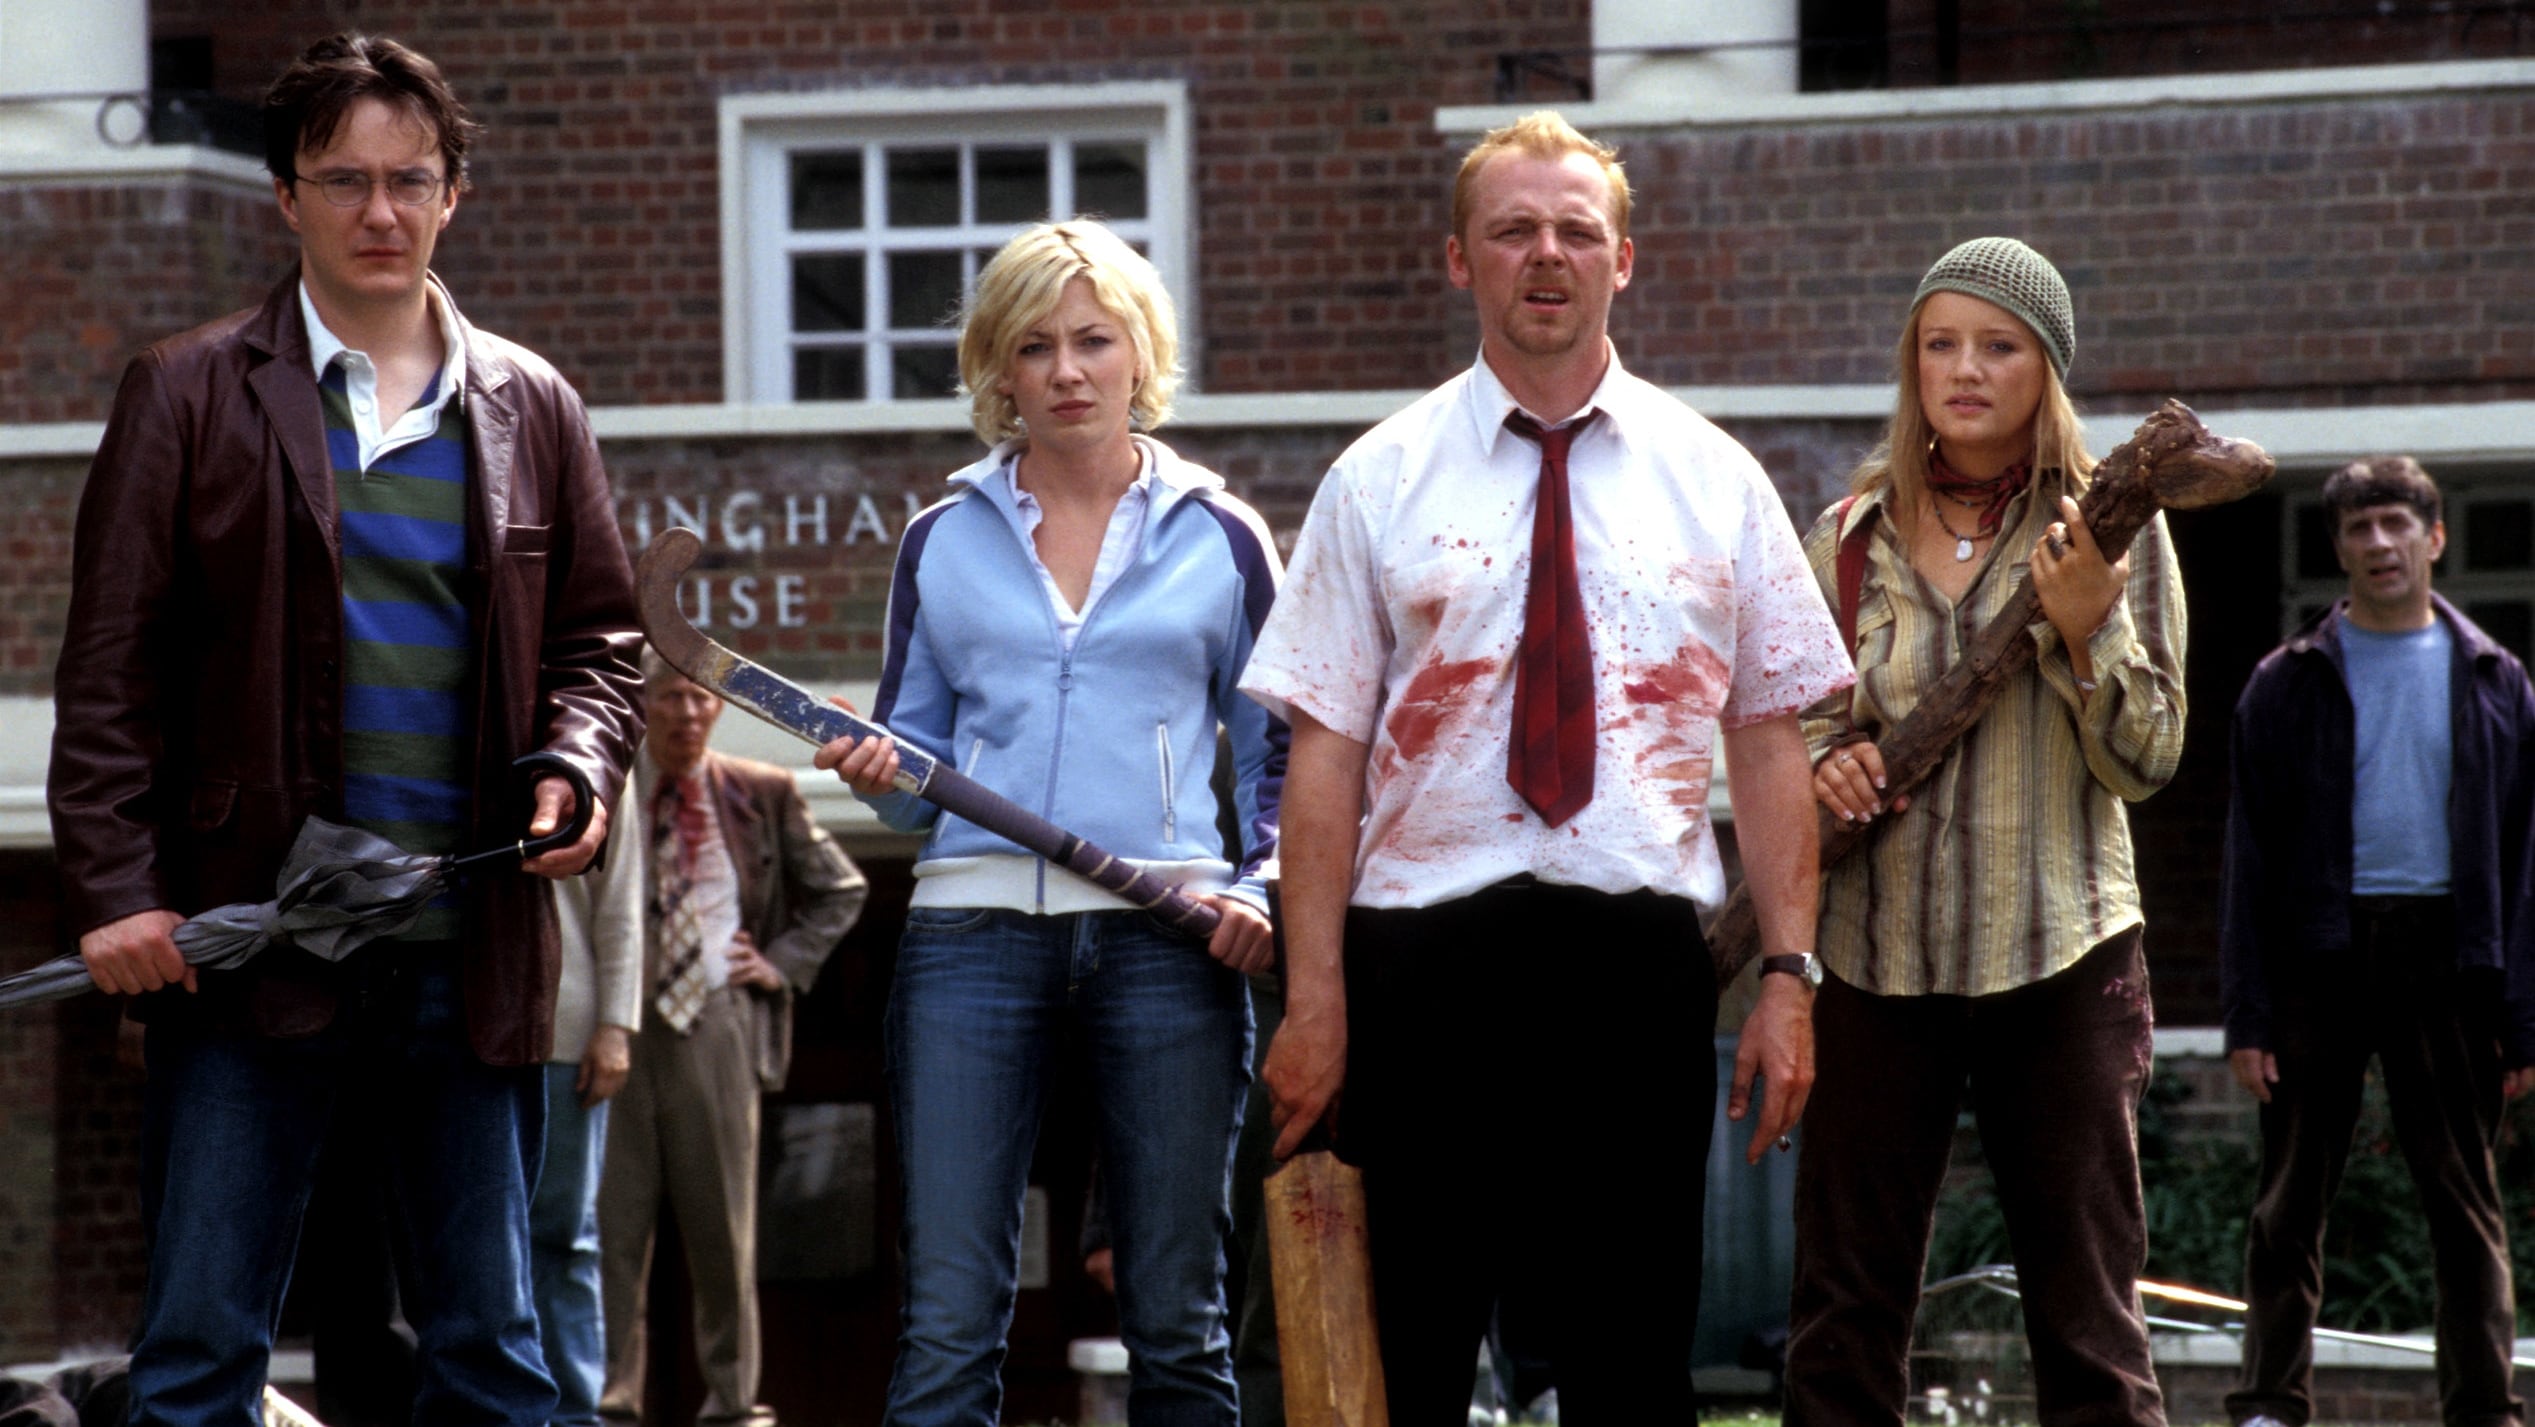 Poster Phim Giữa Bầy Xác Sống (Shaun Of The Dead)